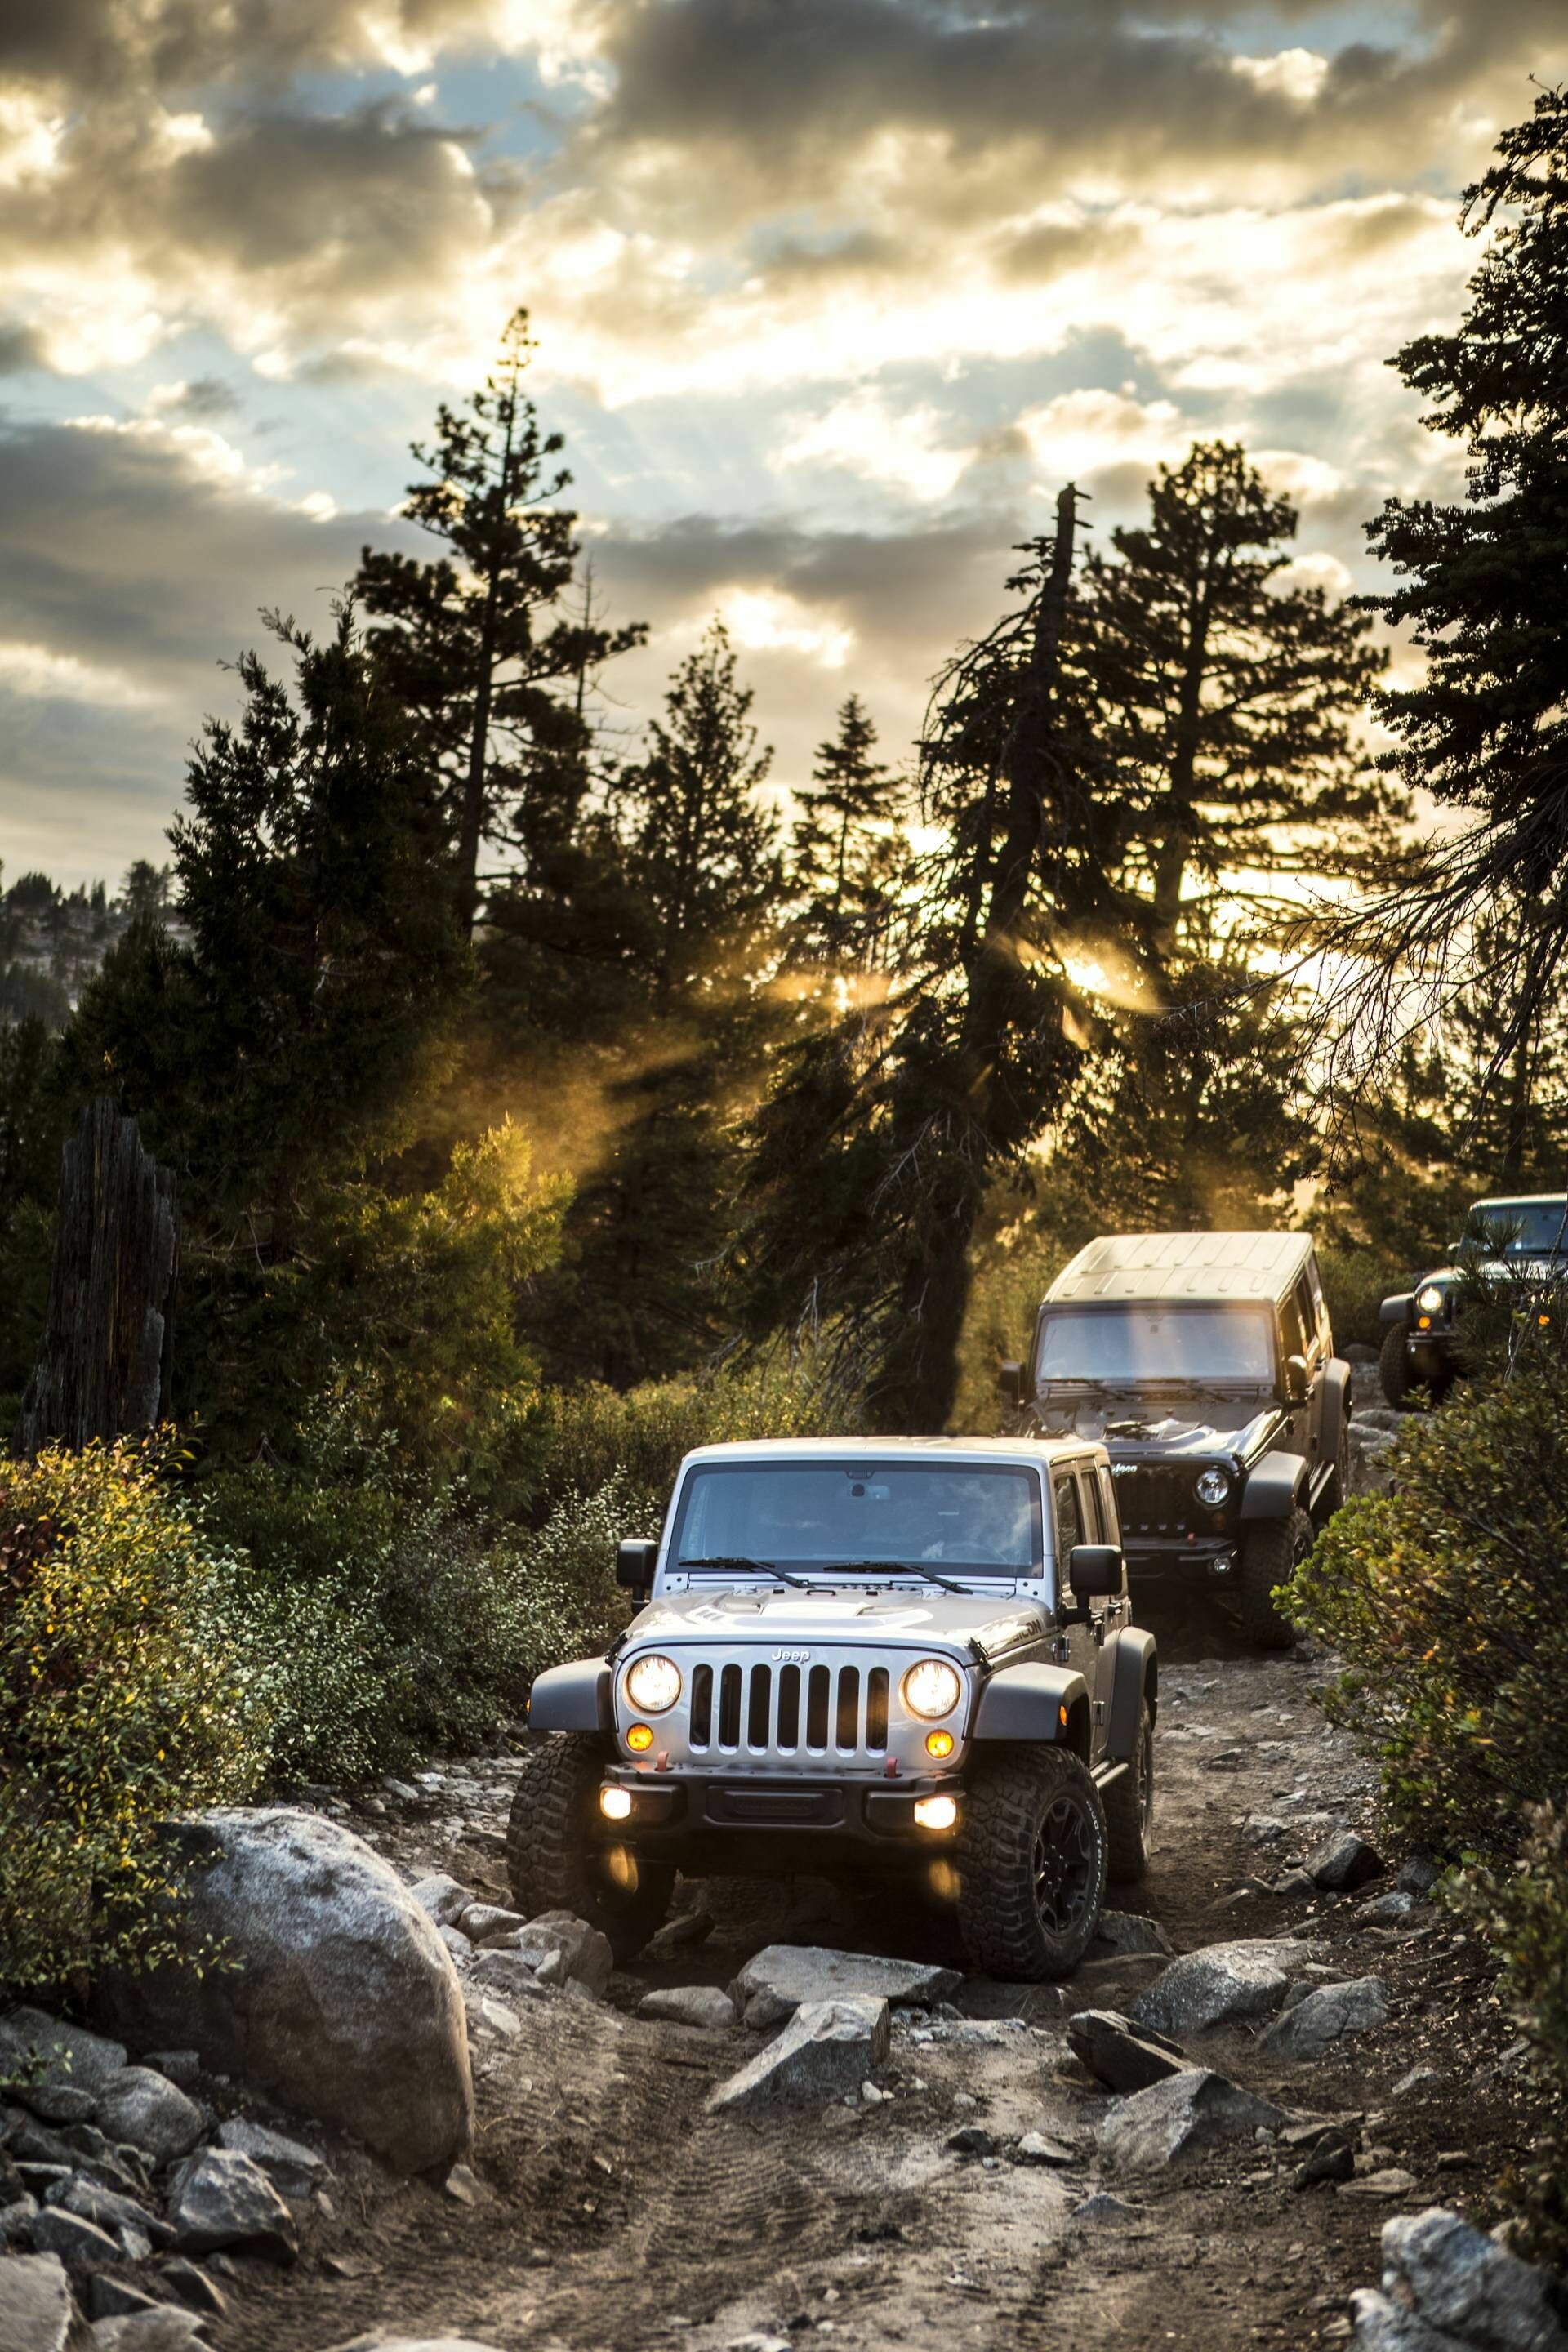 Jeep: Rubicon, Equipped with 32" BF Goodrich Mud-Terrain KM wheels with 17" alloy wheel. 1920x2880 HD Background.